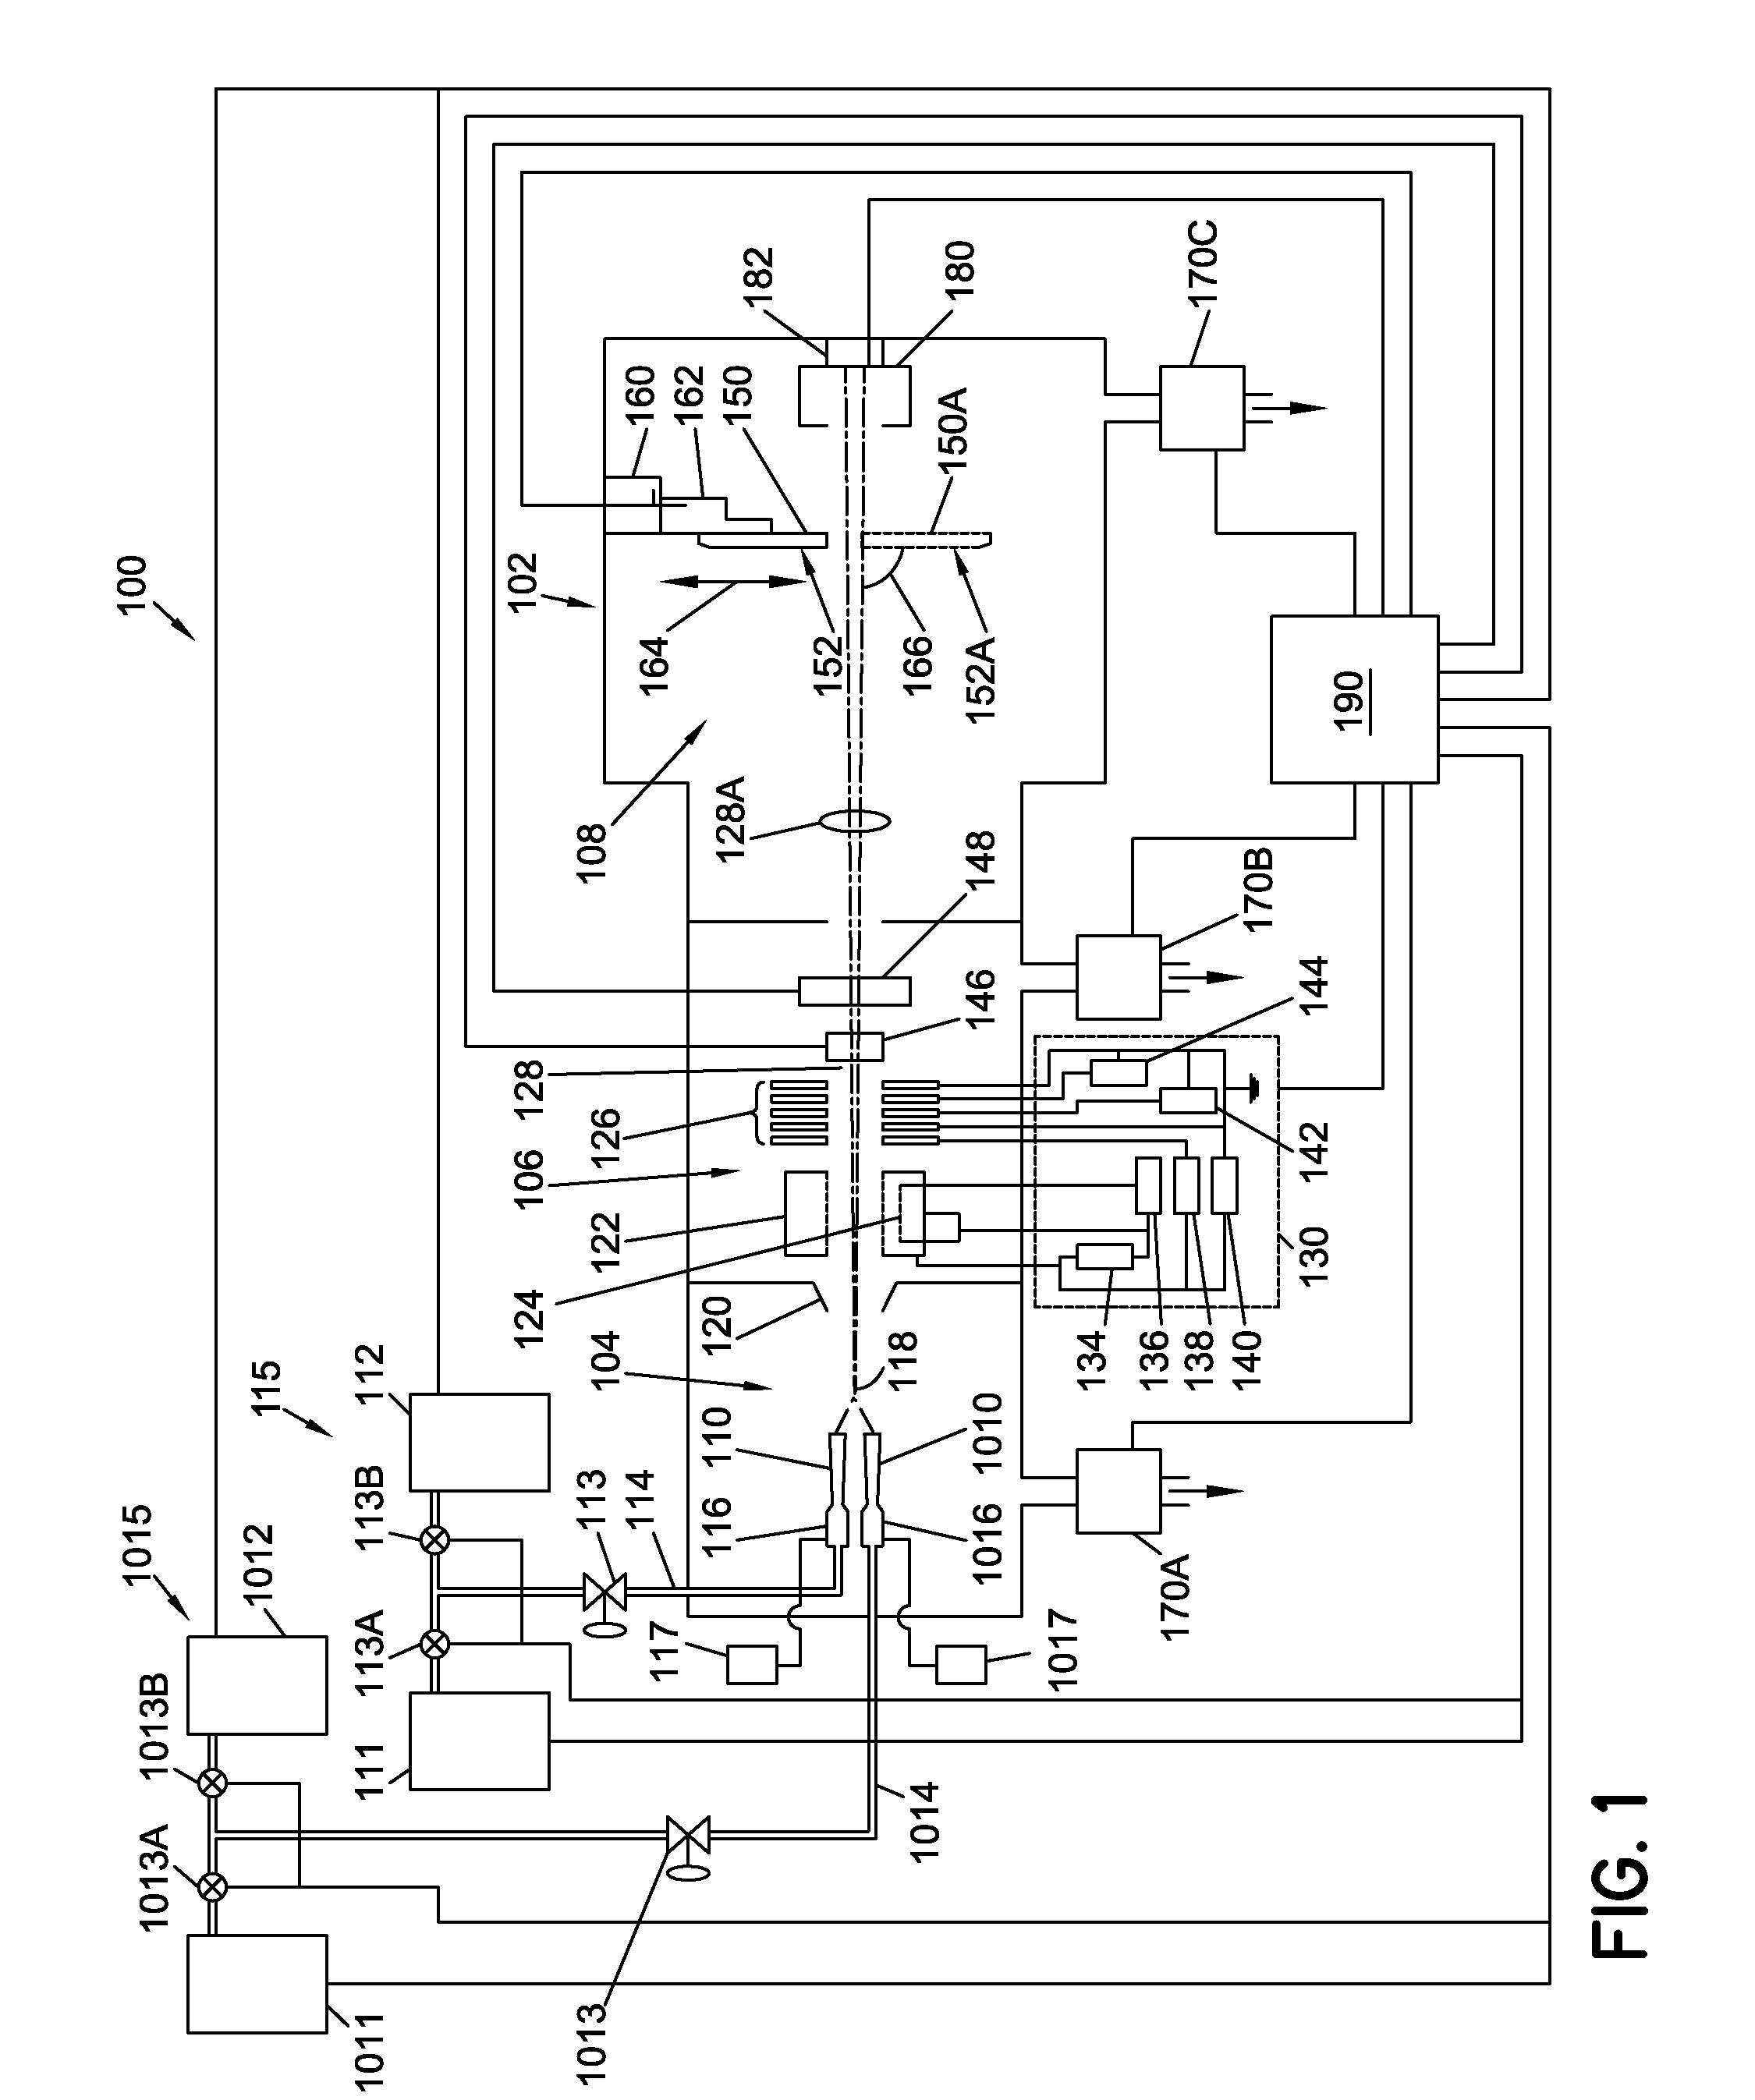 Multiple nozzle gas cluster ion beam processing system and method of operating